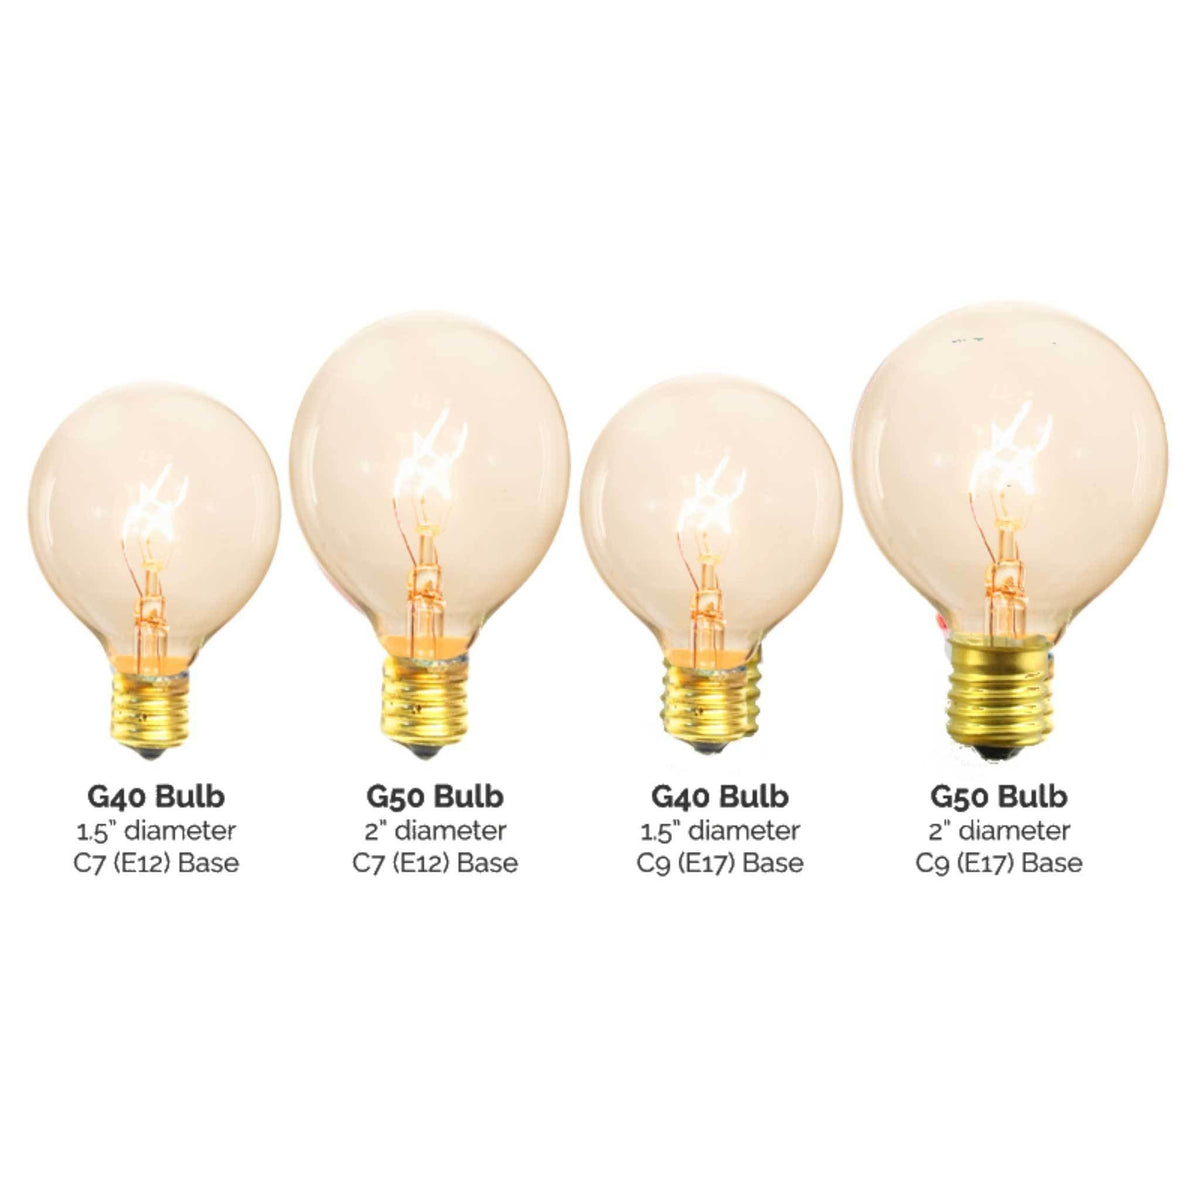 1 Box of 25 of brand new transparent Clear G50 Globe Light Bulbs Replace your old bulbs today from leedisplay.com